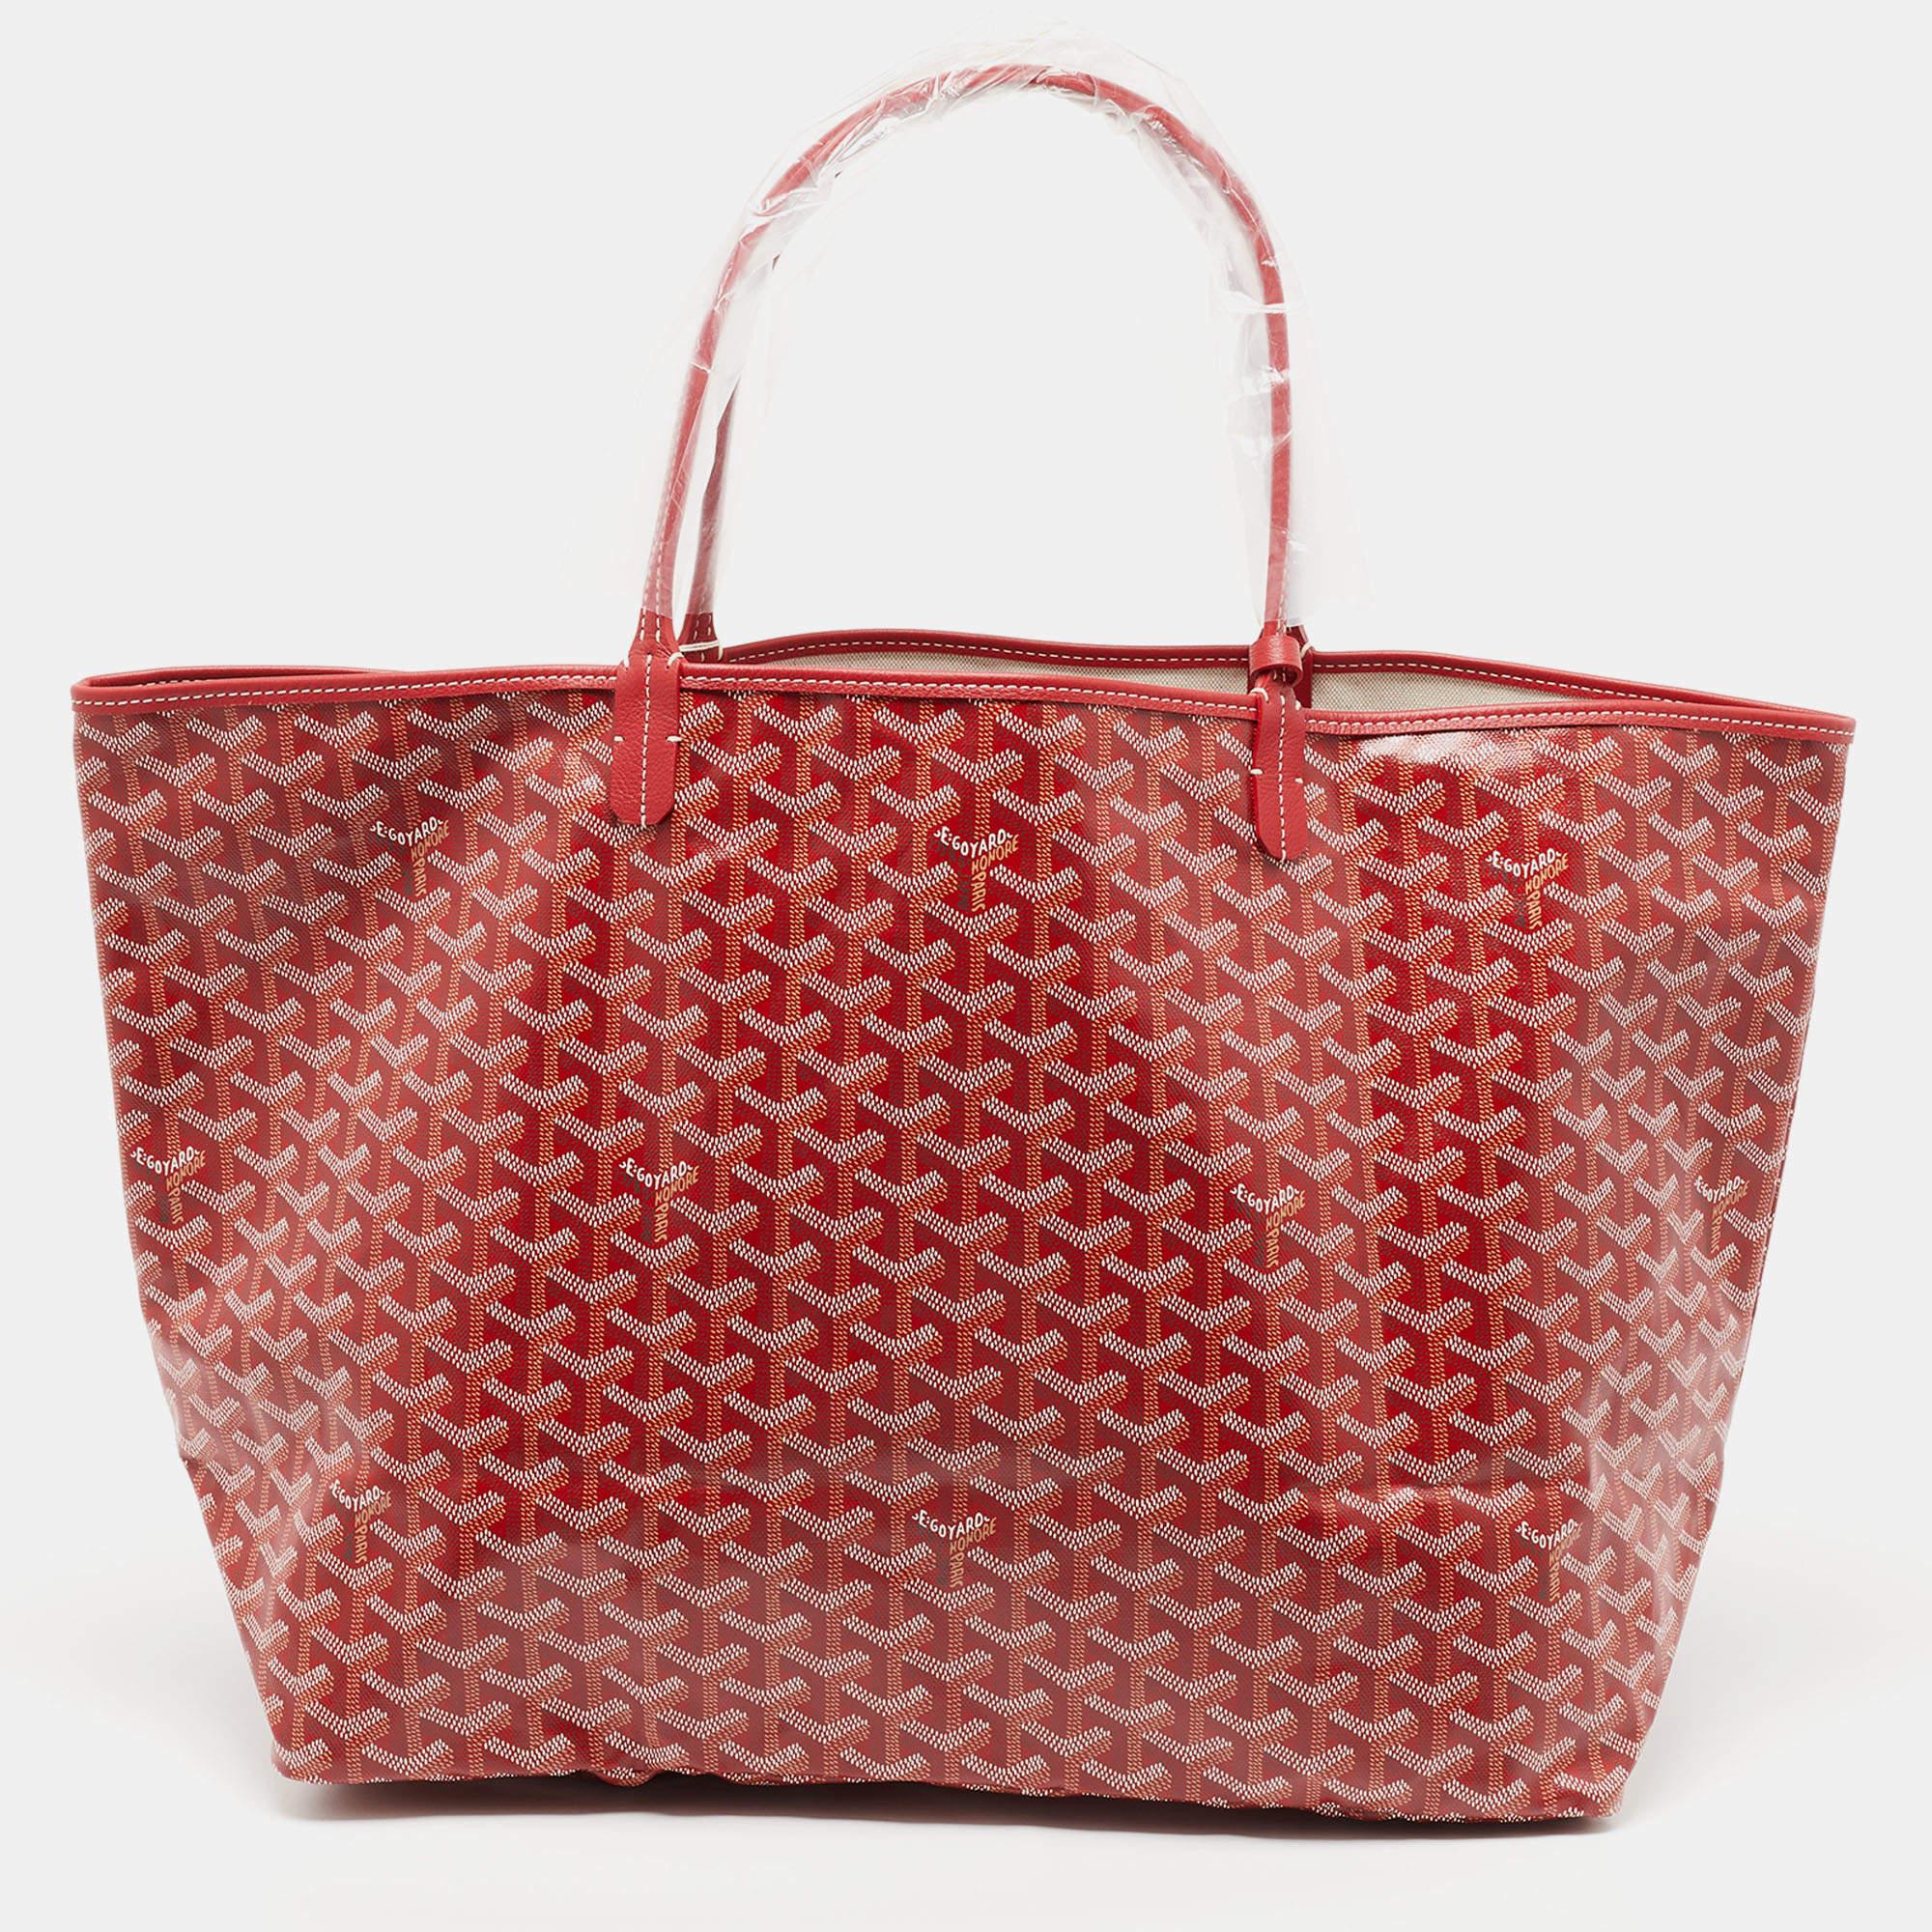 The Saint Louis tote is a Goyard icon that is perfectly made to accompany you every day. It is a testament to high quality, durability, and classic appeal.

Includes: Original Dustbag, Original Pouch, Info Booklet, Original Dust Cloth

